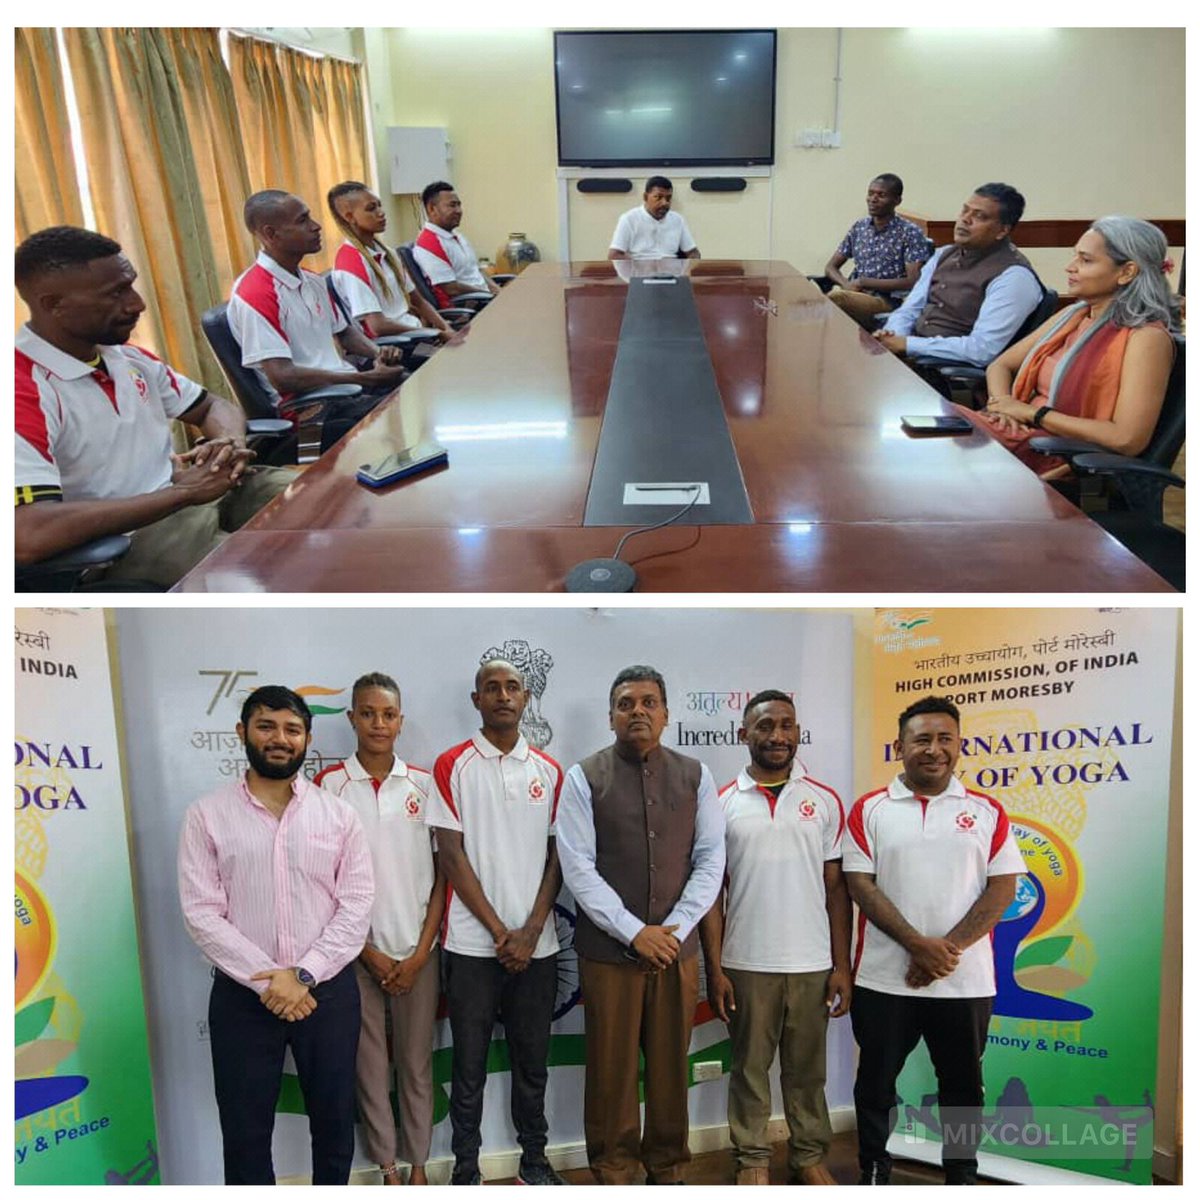 Four PNG candidates are set to embark on a transformative journey through a month-long Yoga training course @SvyasaYoga Bengaluru, sponsored by @iccr_hq. This initiative is under PM's vision of establishing Yoga centers in PICs during FIPIC-3 Summit 2023. Wish them all success !